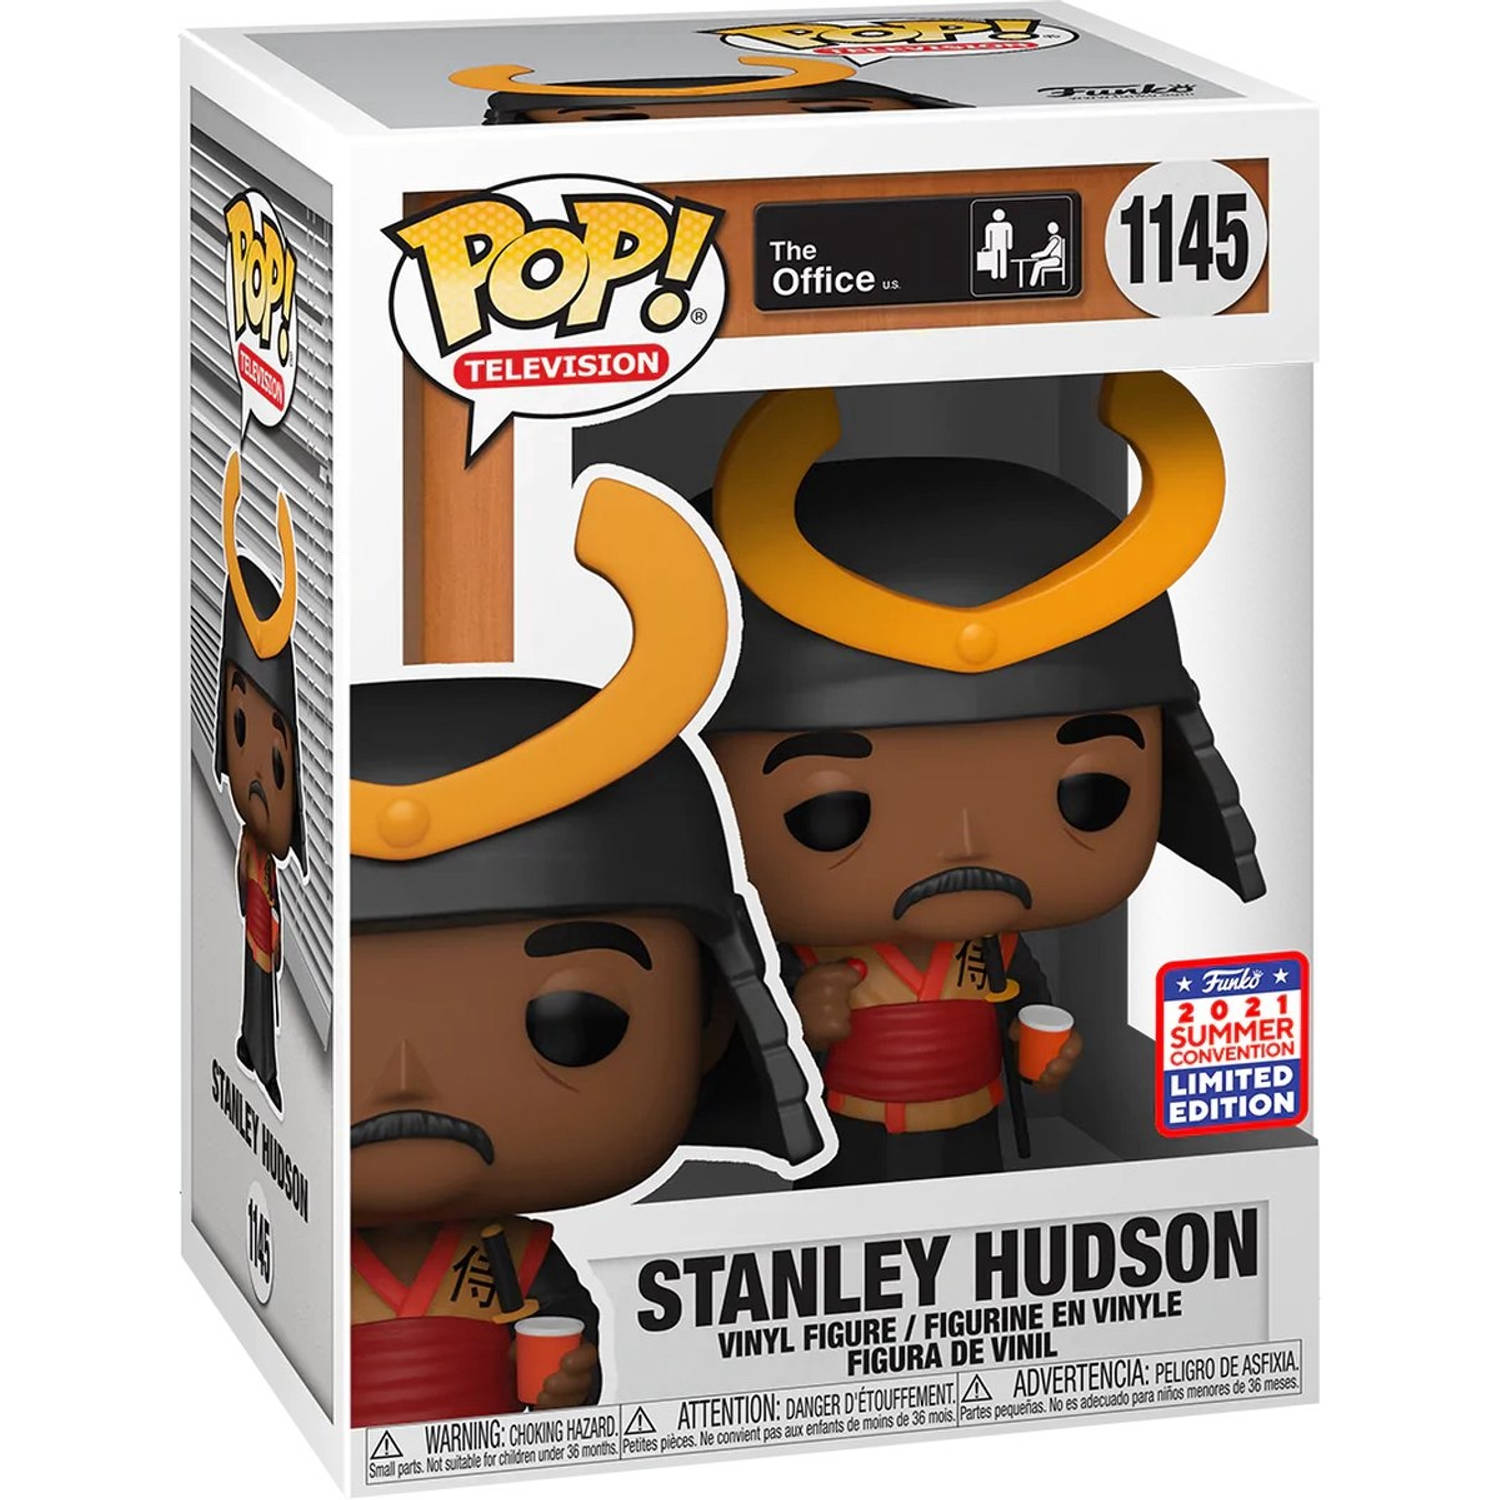 Funko Pop! The Office - Stanley Hudson 2021 Summer Convention Limited Edition #1145